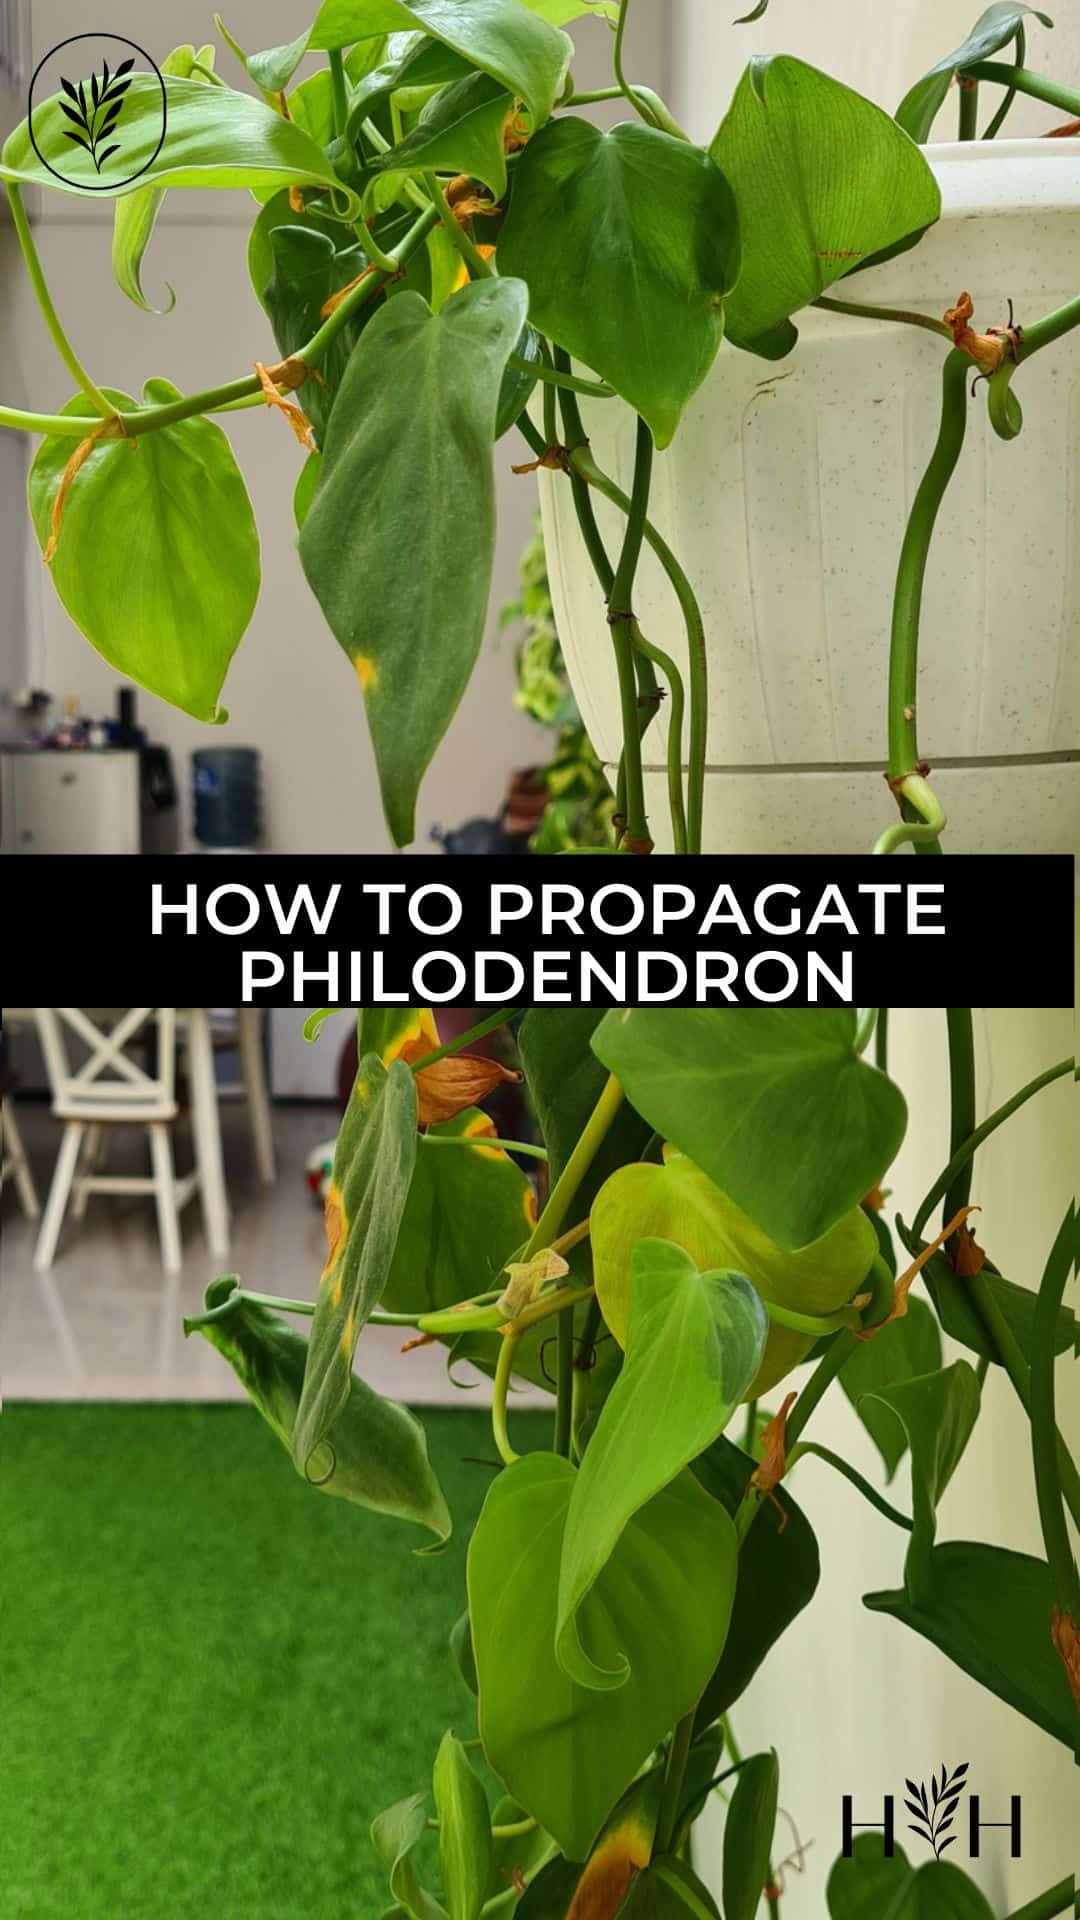 How to propagate philodendron via @home4theharvest